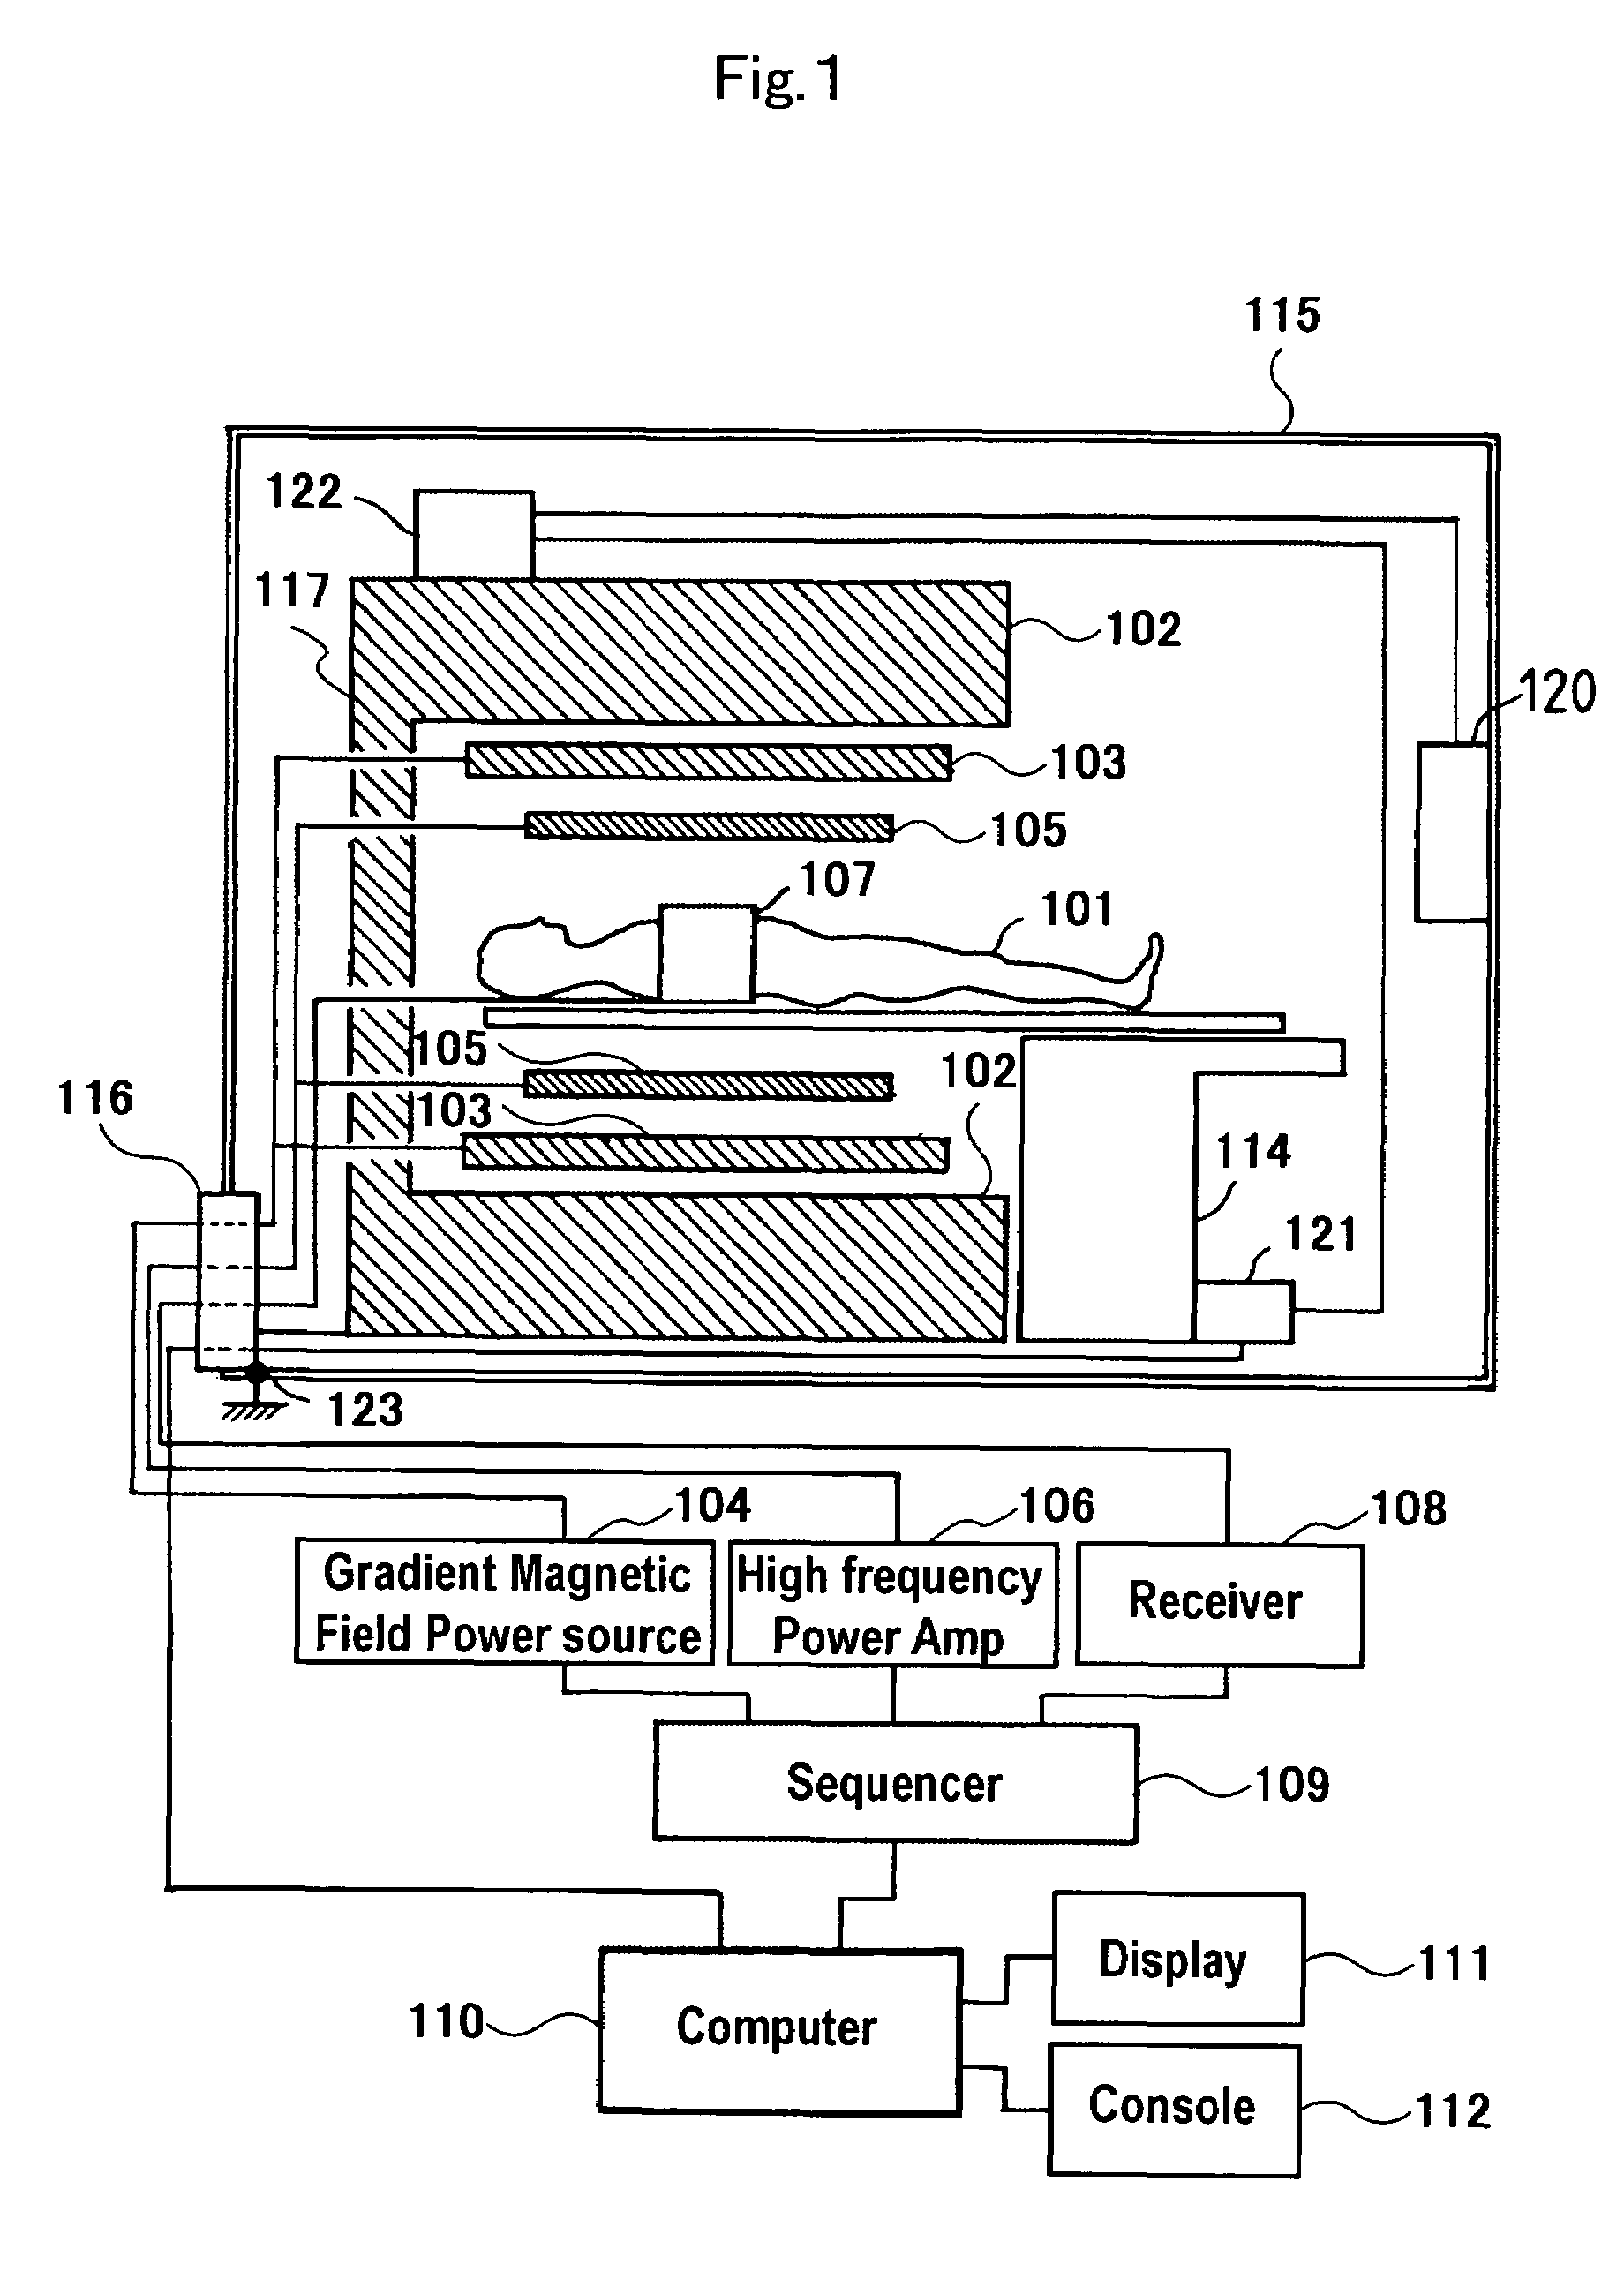 Magnetic resonance imaging apparatus provided with means for preventing closed loop circuit formation across and between inside and outside of cryostat